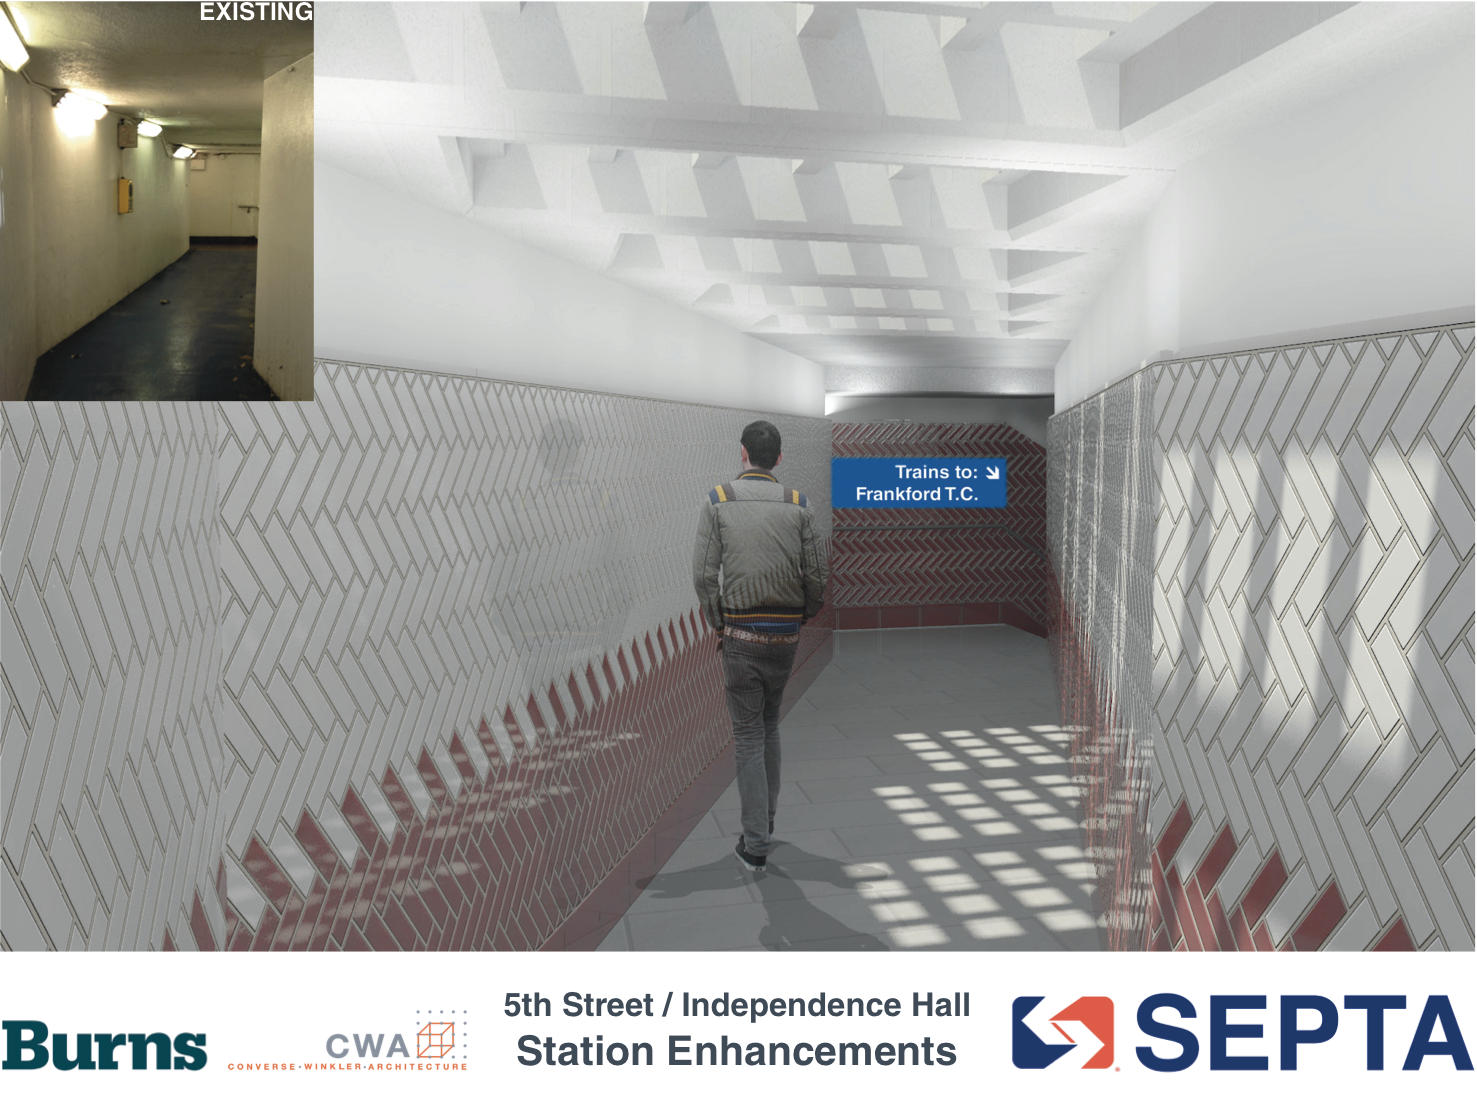 5th Street / Independence Hall: Passageway rendering | courtesy of SEPTA